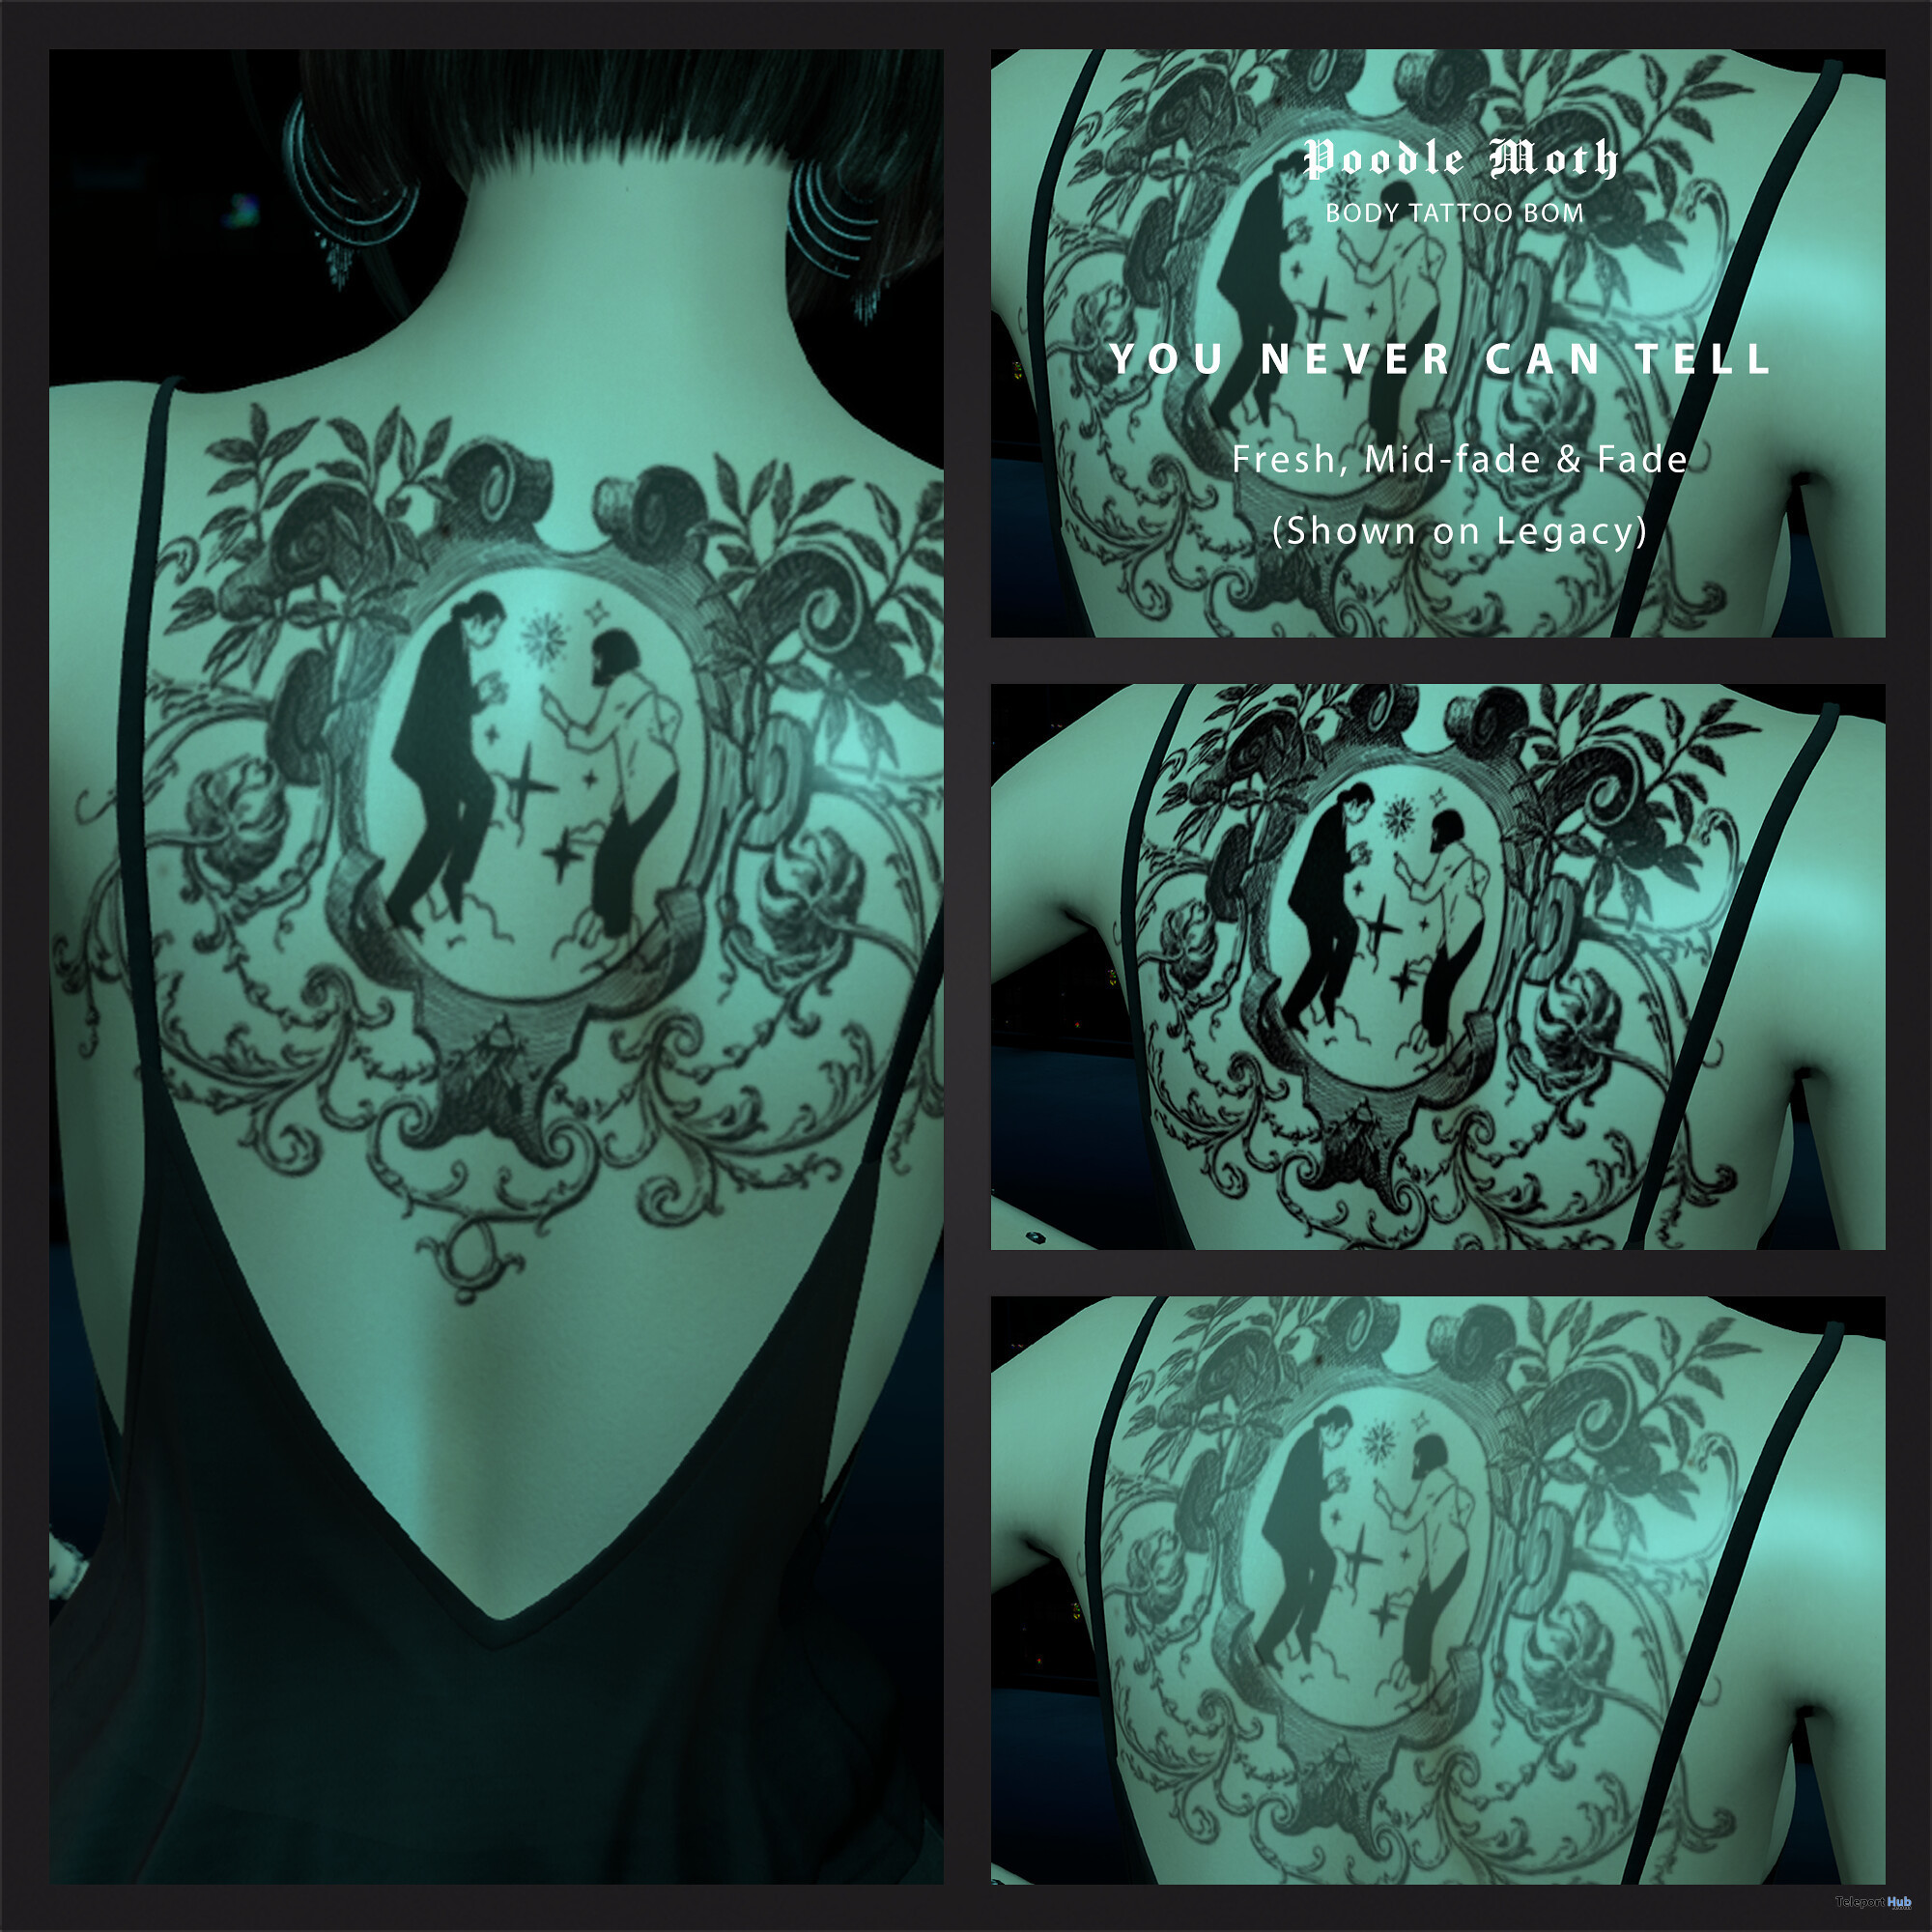 You Never Can Tell Back Tattoo March 2023 Group Gift by Poodle Moth - Teleport Hub - teleporthub.com